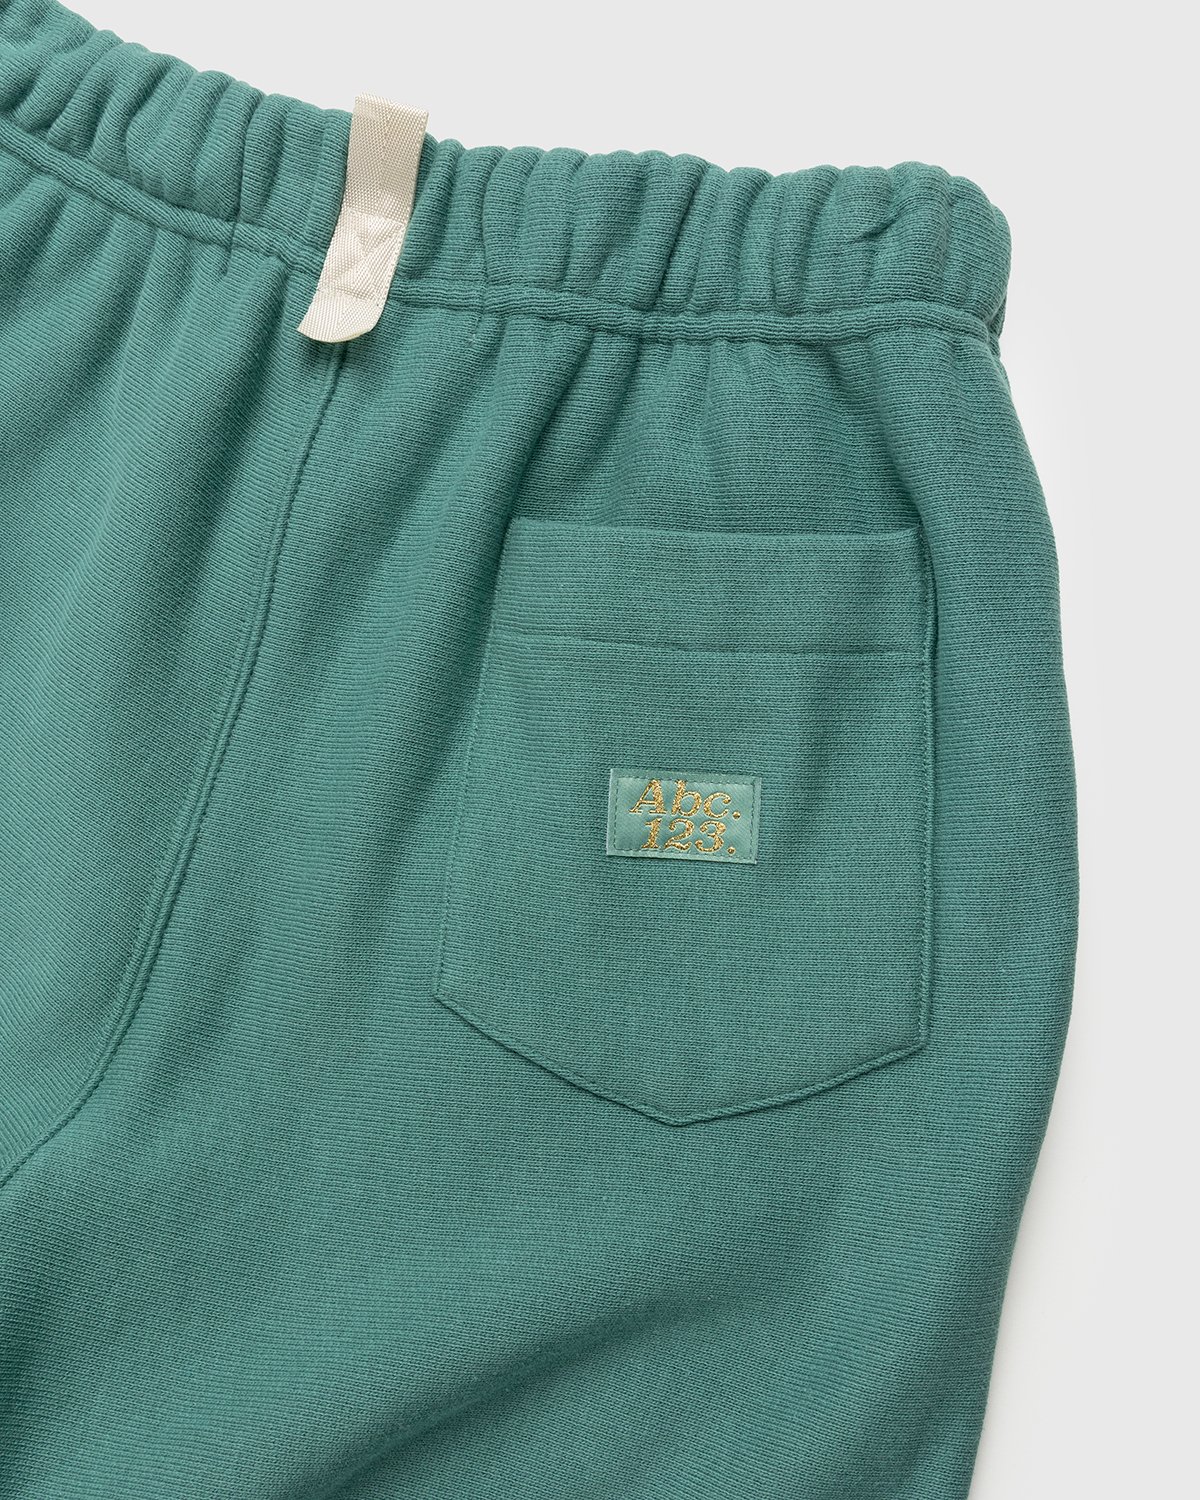 Abc. - French Terry Sweatpants Apatite - Clothing - Green - Image 3